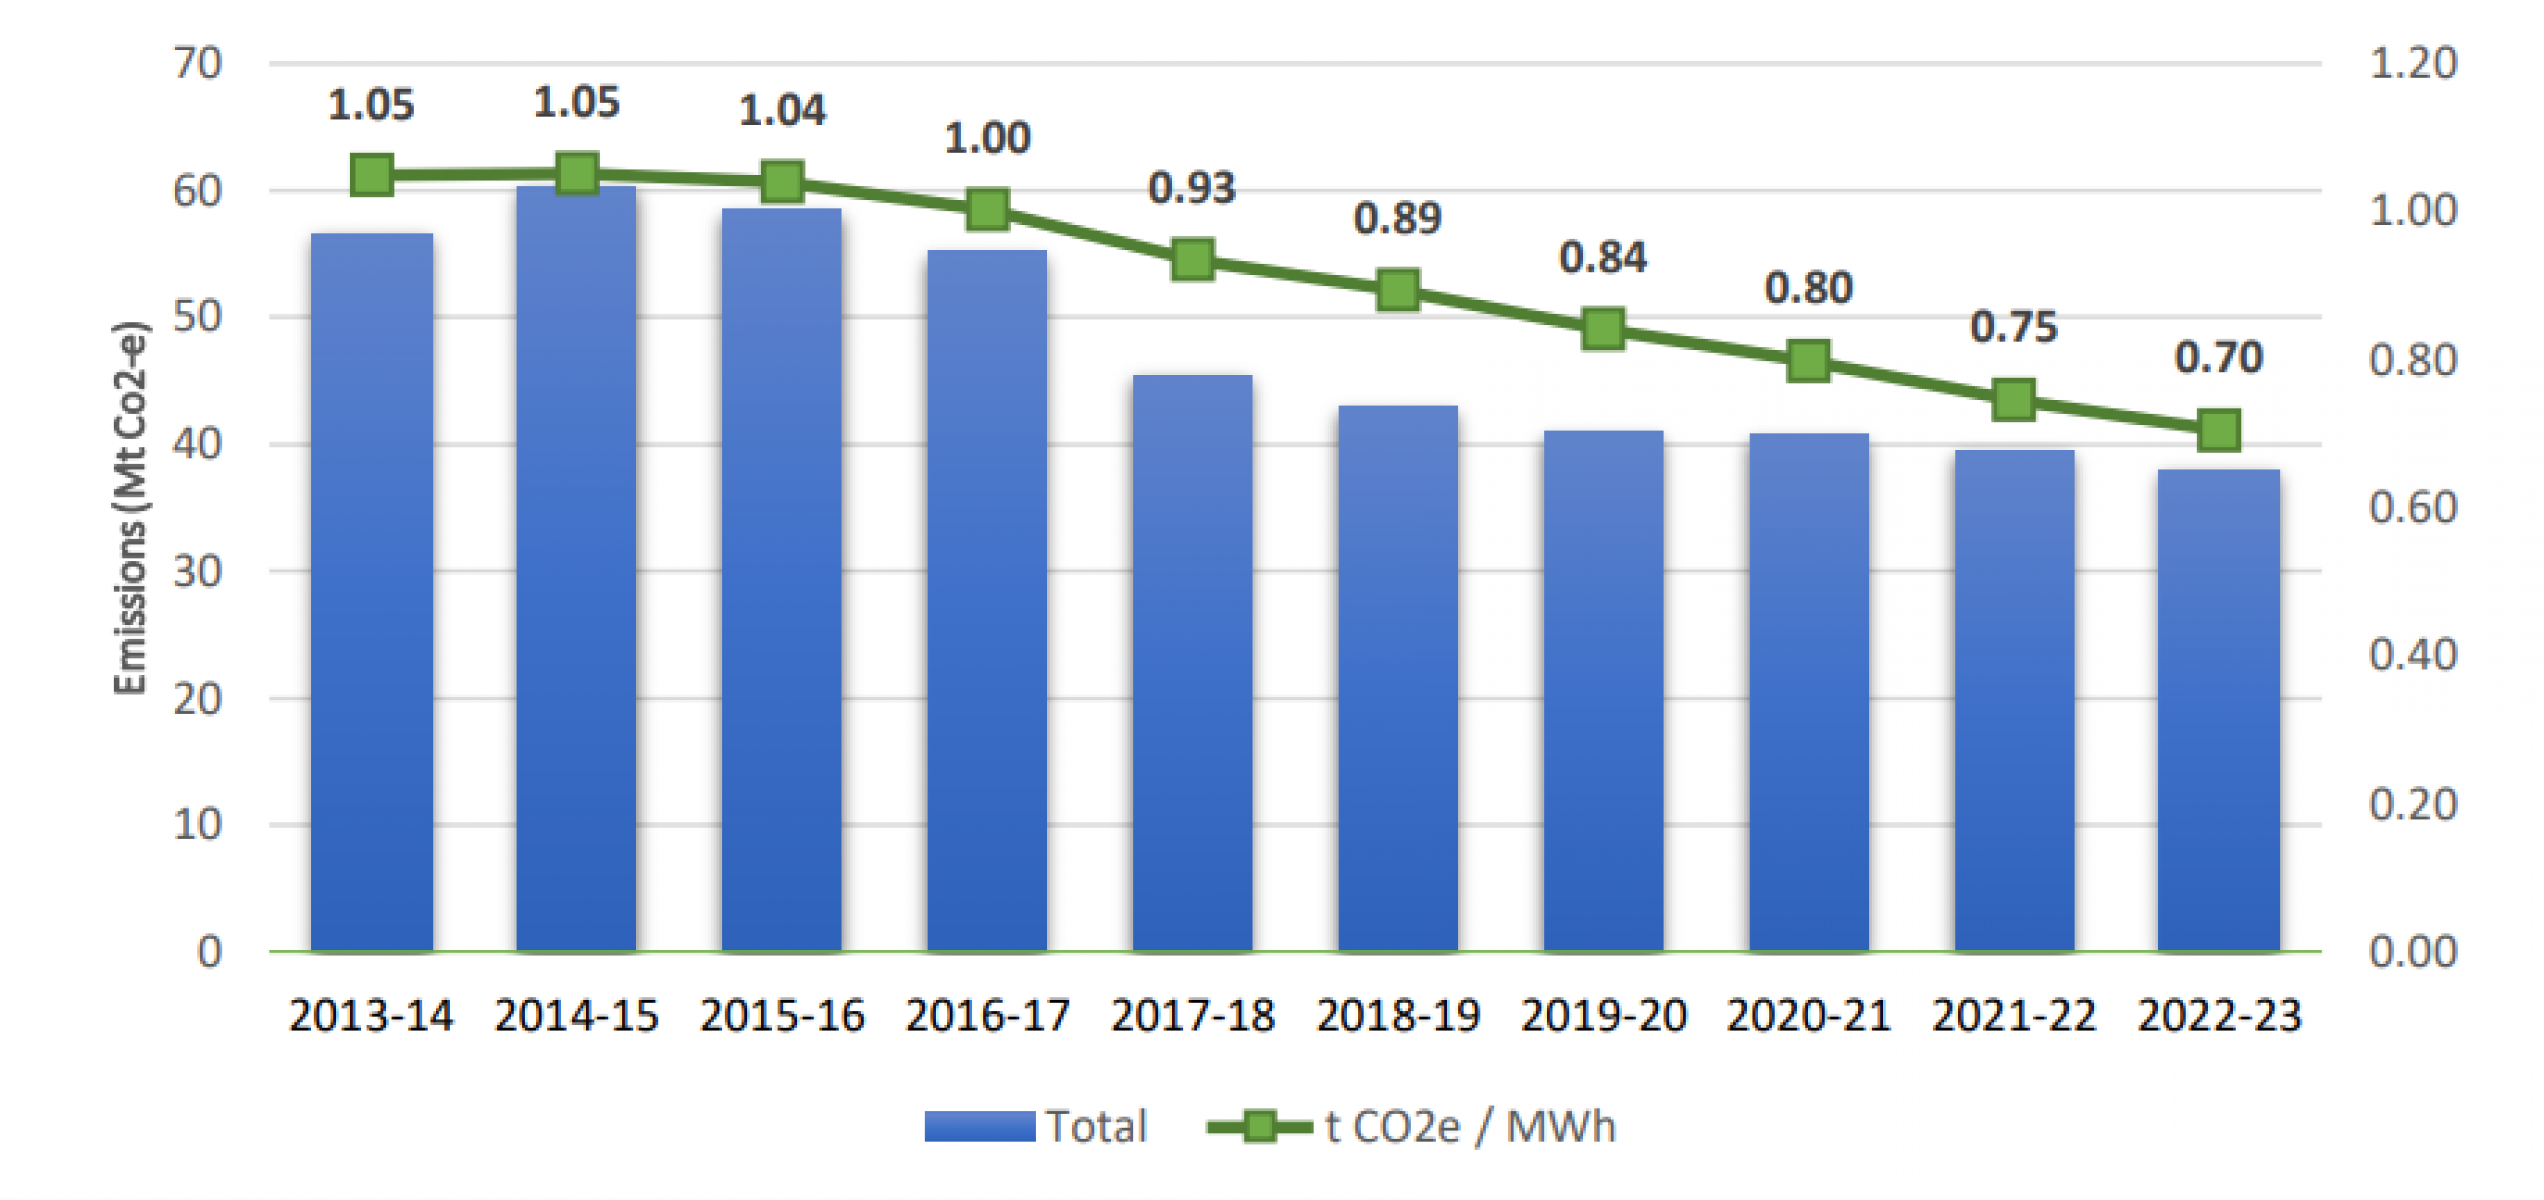 Figure 4: Emissions from electricity generation in Victoria, 2013/14 to 2022/23. 2013-14 = 1.05, 2014-15 = 1.05, 2015-16 = 1.04, 2016-17 = 1, 2017-18 = 0.93, 2018-19 = 0.89, 2019-20 = 0.84, 2020-21 = 0.80, 2021-22 = 0.75, 2022-23 = 0.70